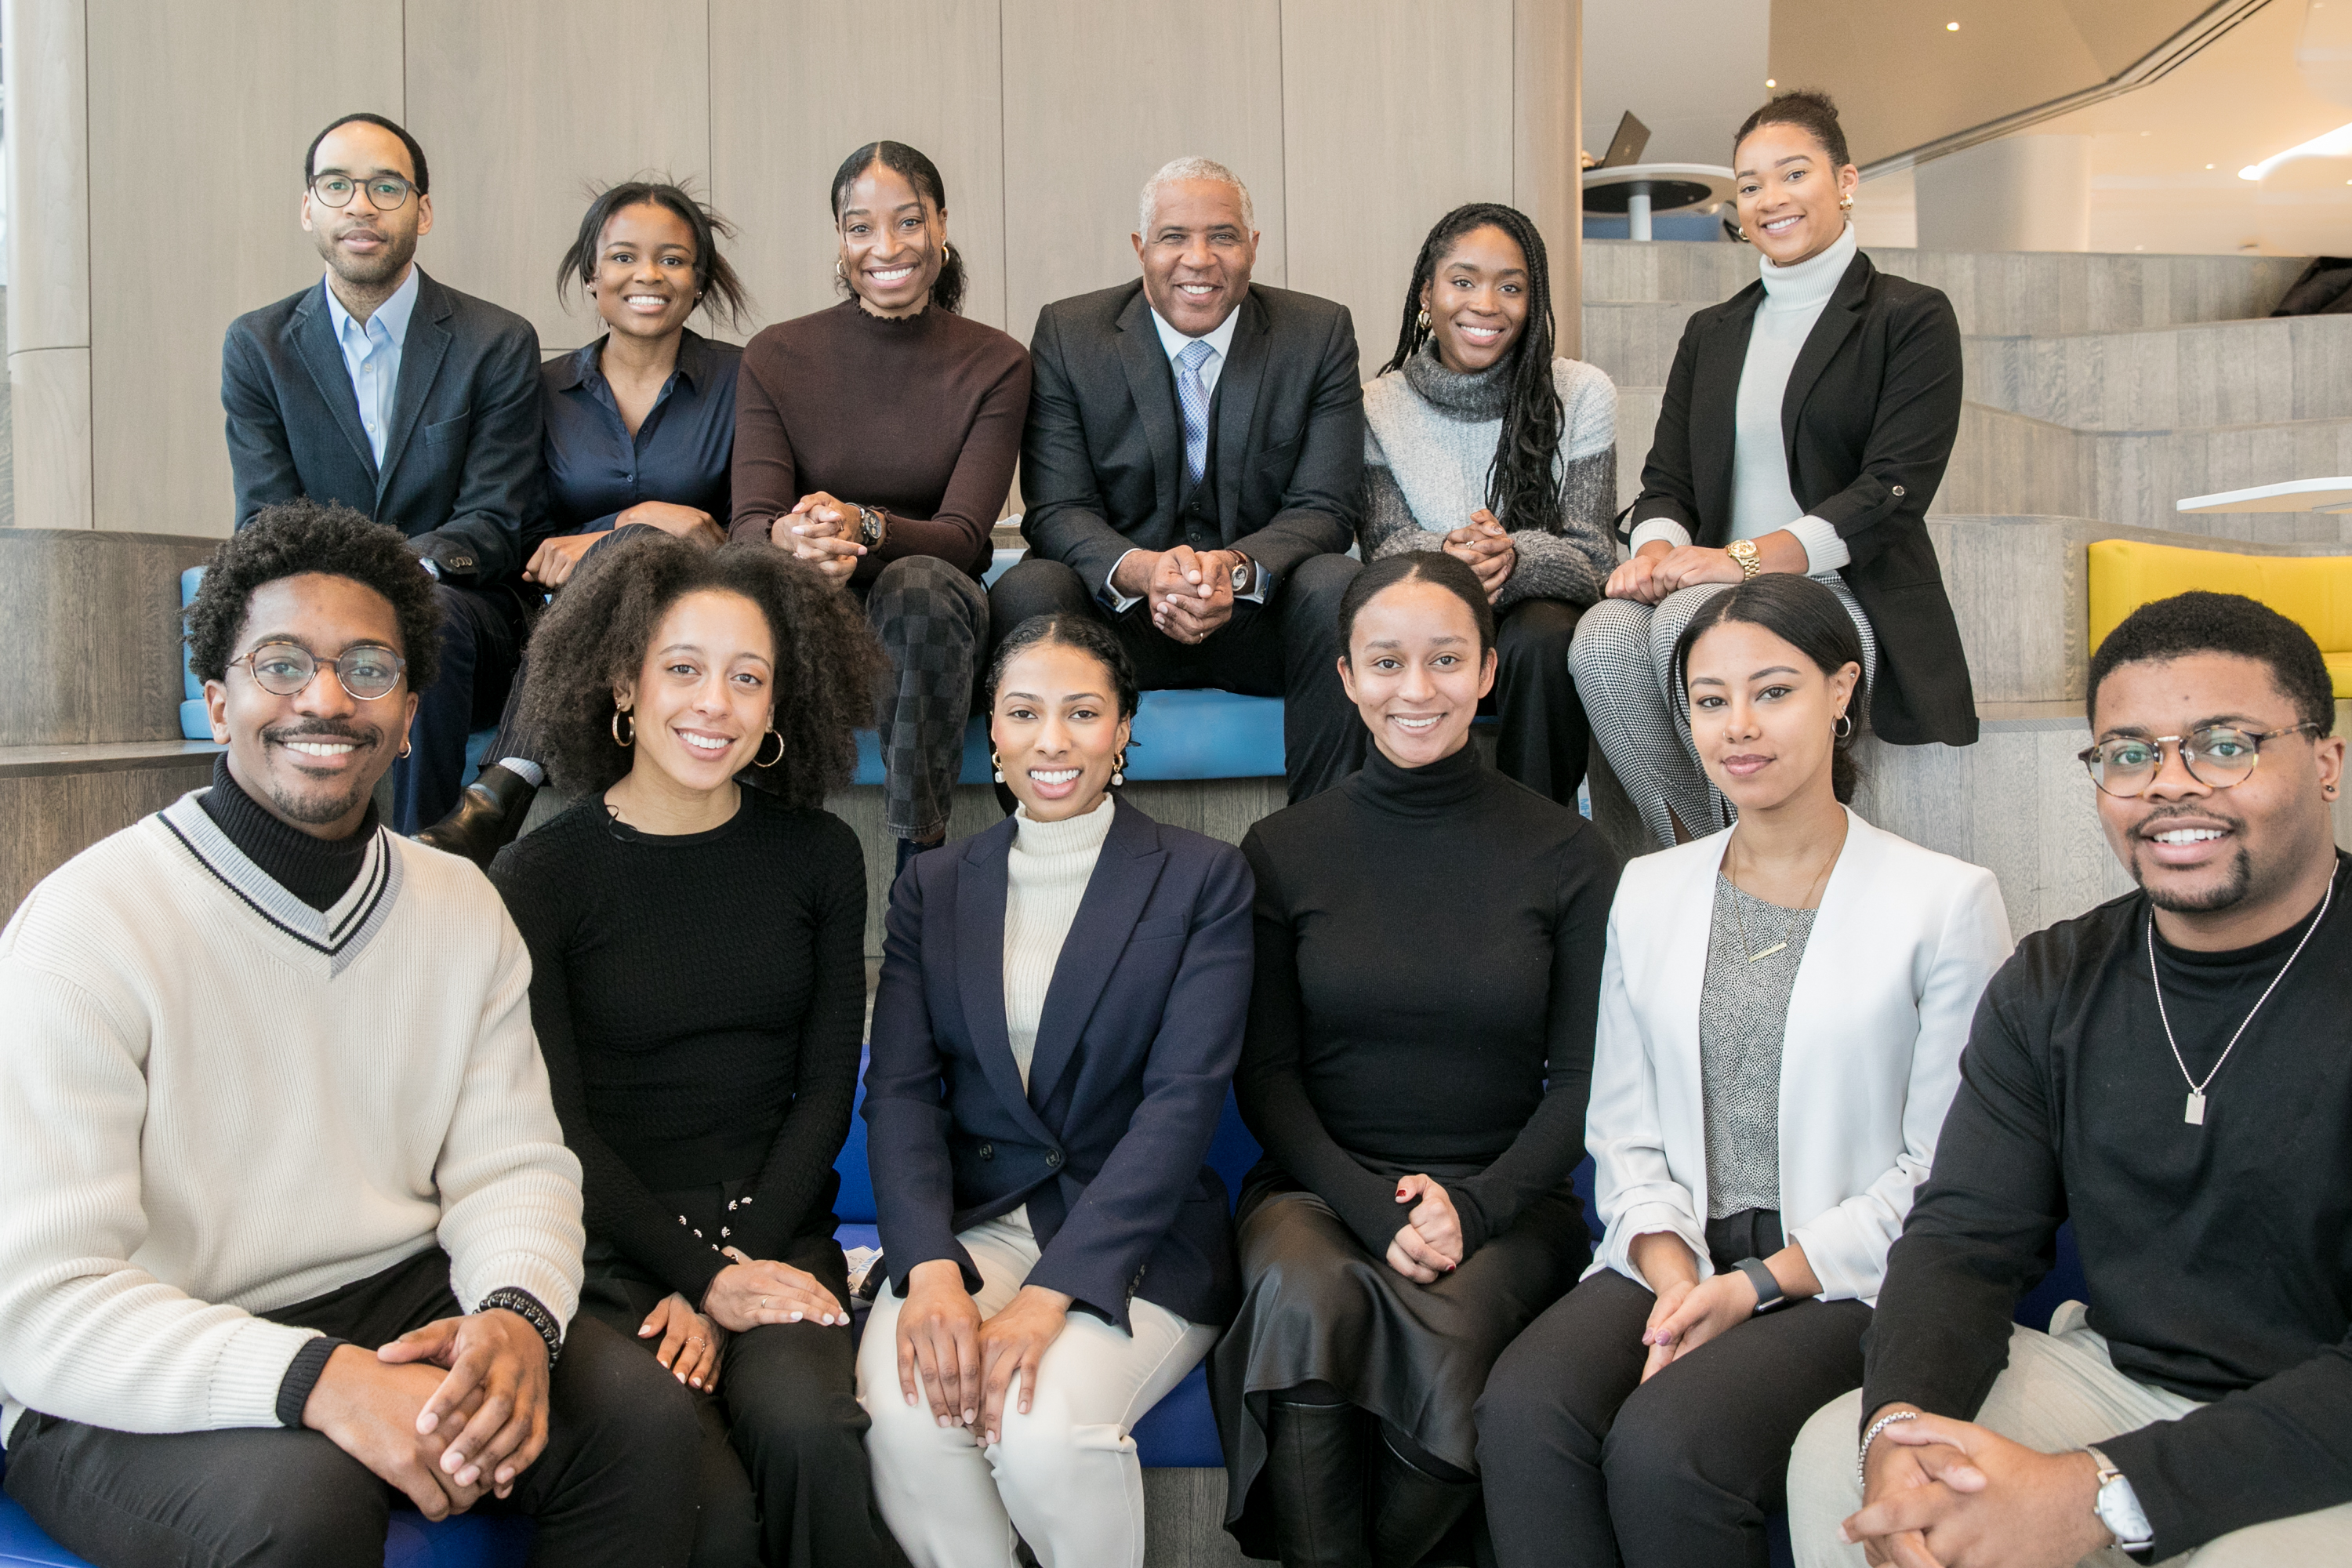 Robert F. Smith ’94 meets with the Robert Smith Scholars